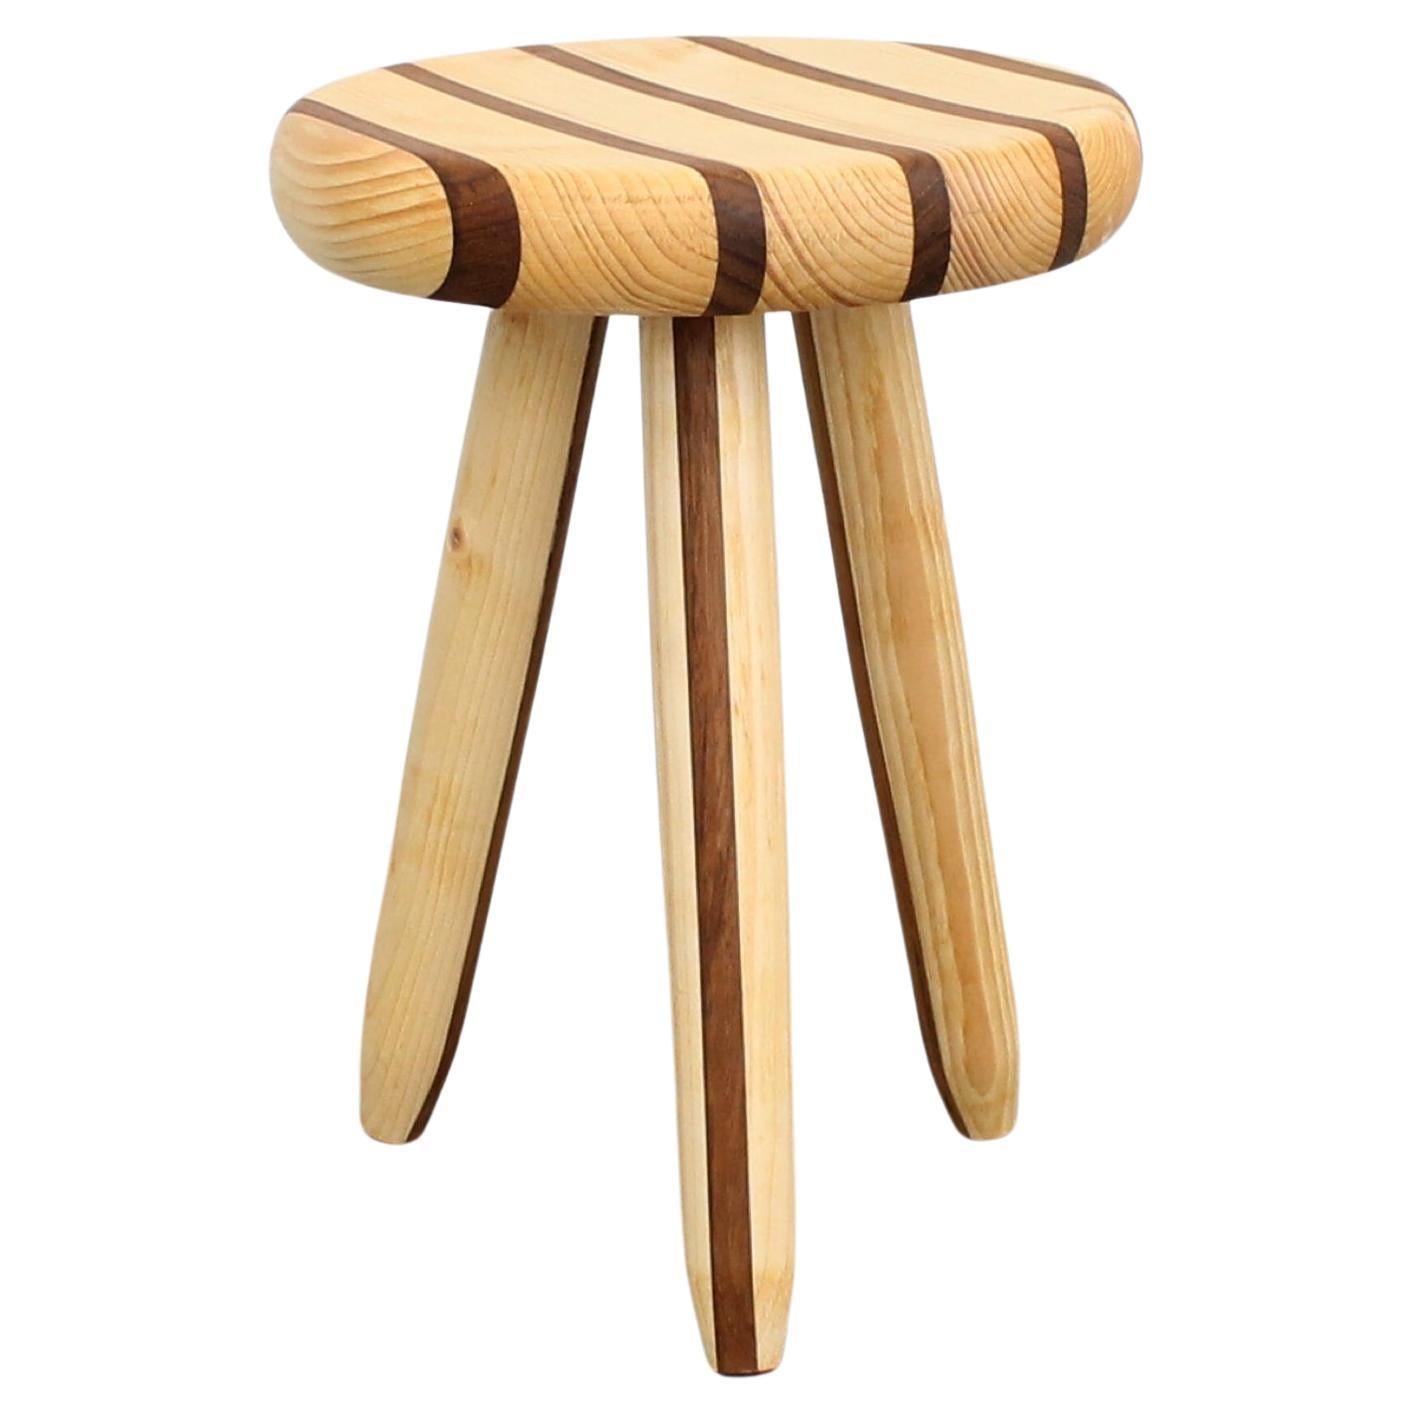 Swedish milking stool in pine and teak by Andreas Zätterqvist